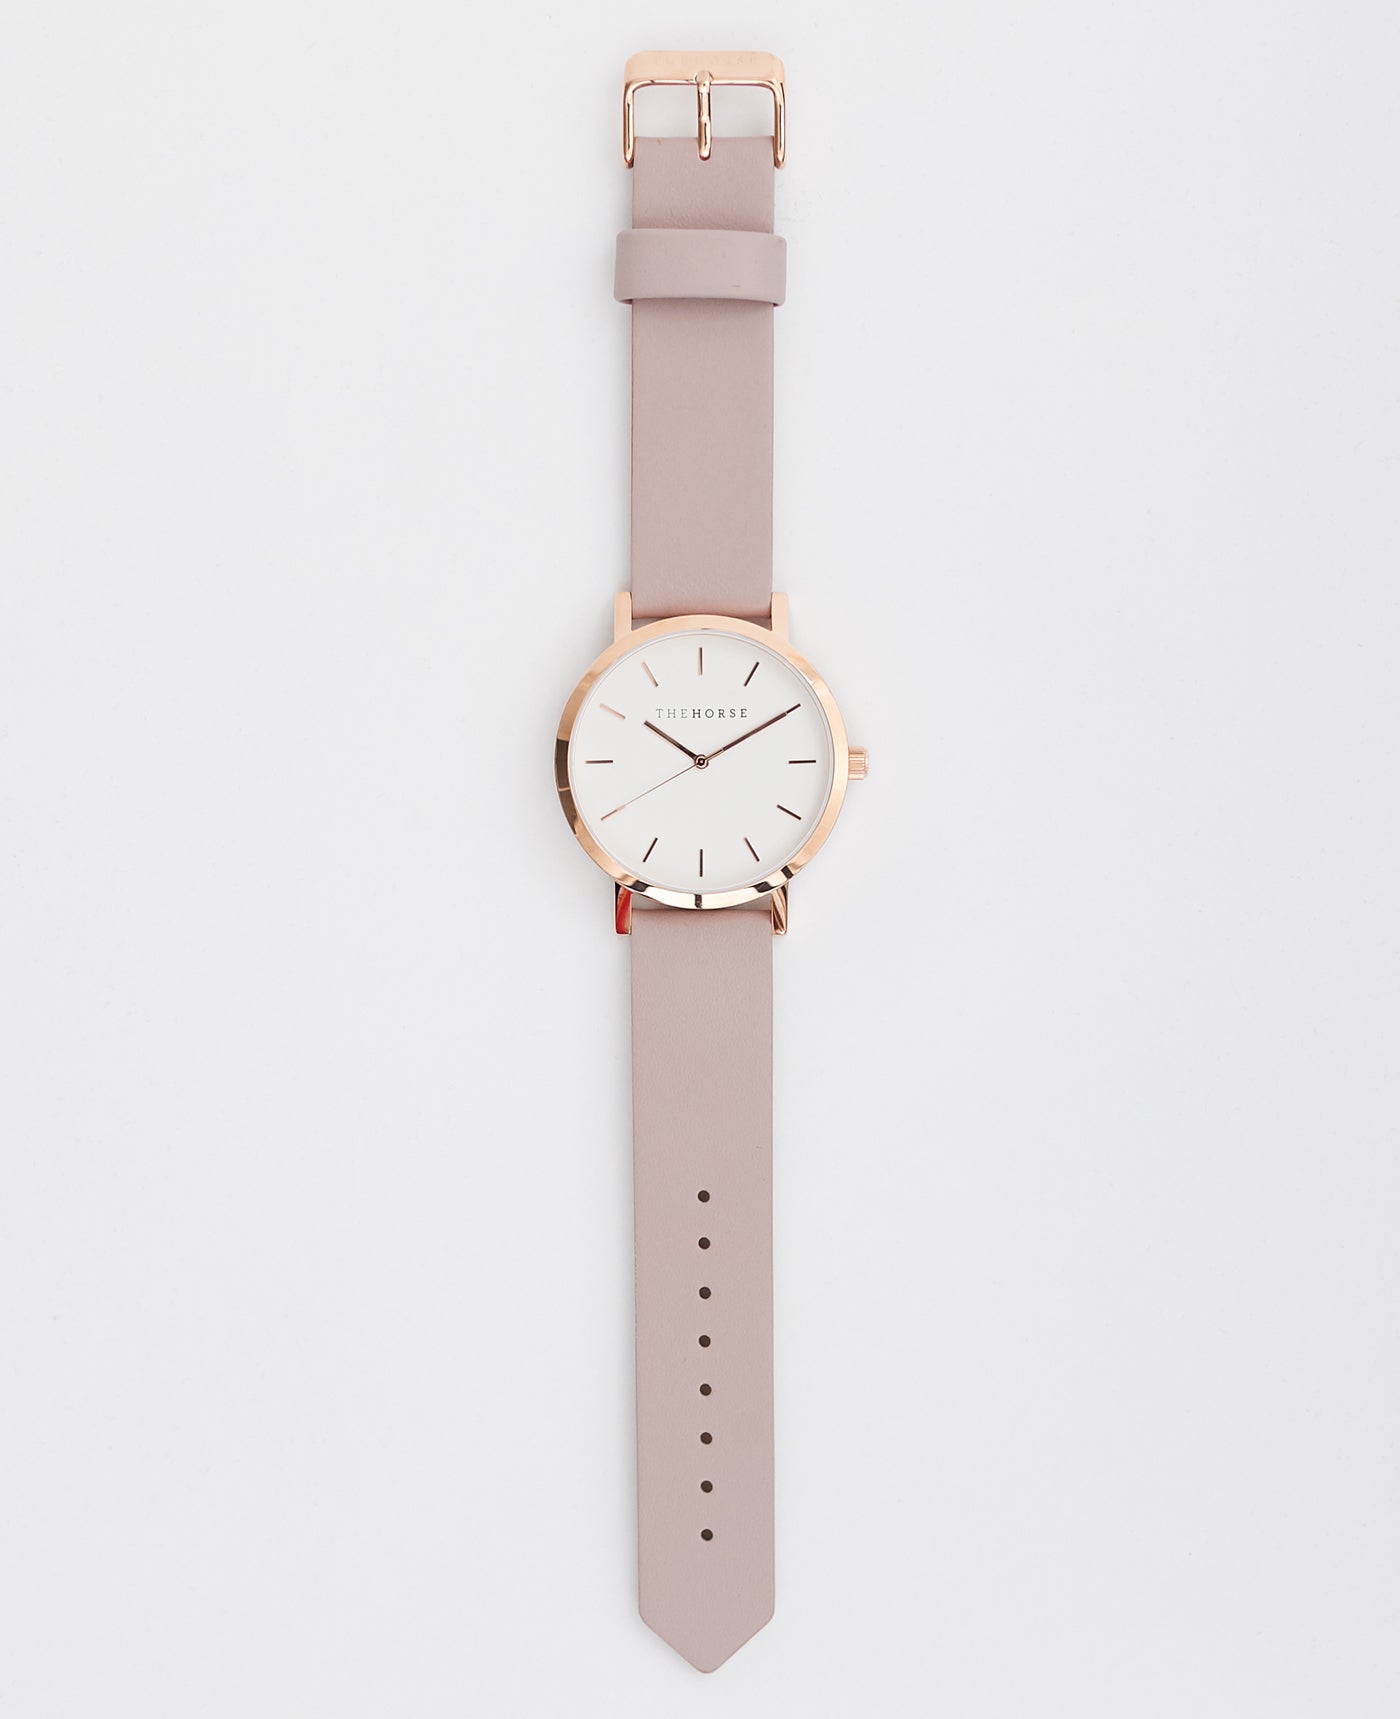 The Original Watch Polished Rose Gold / Blush Leather Strap by The Horse